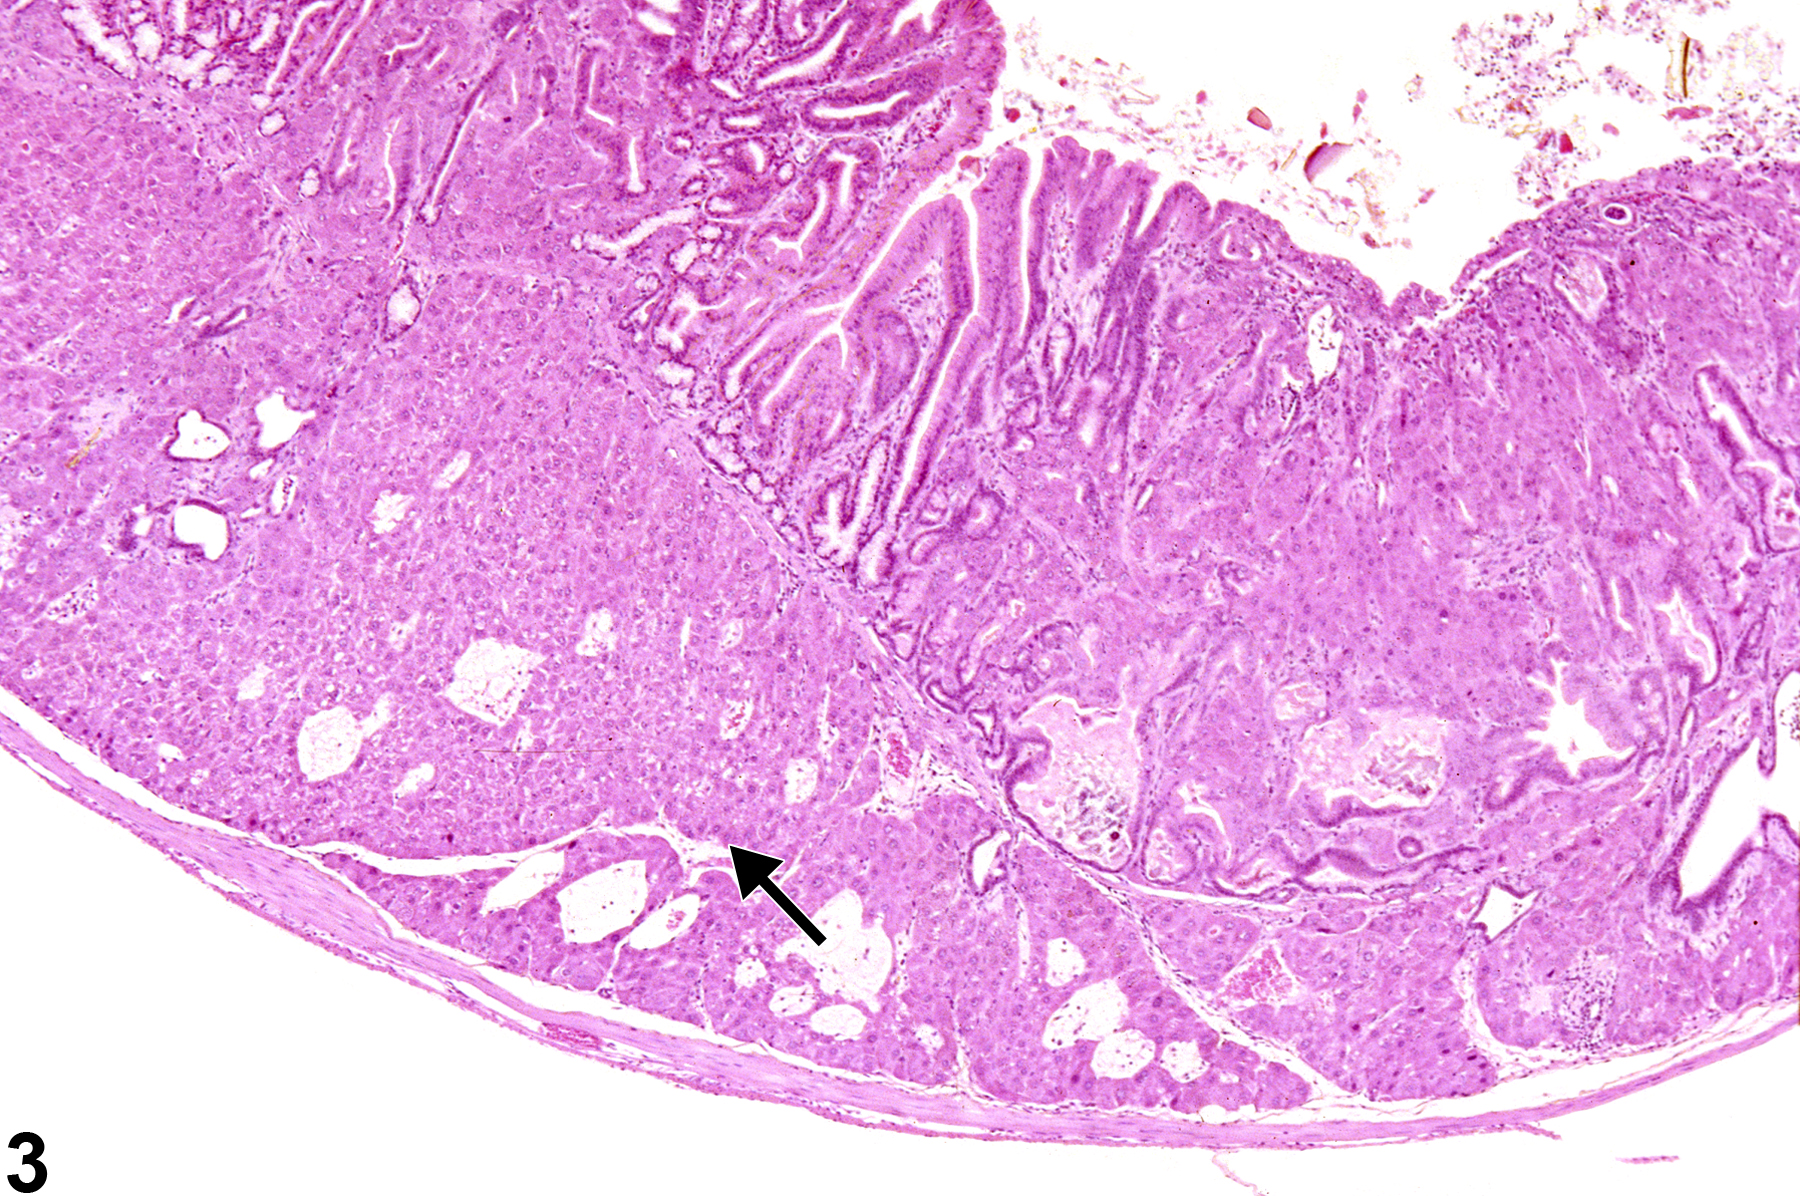 Image of ectopic tissue (liver) in the glandular stomach from a female B6C3F1 mouse in a chronic study